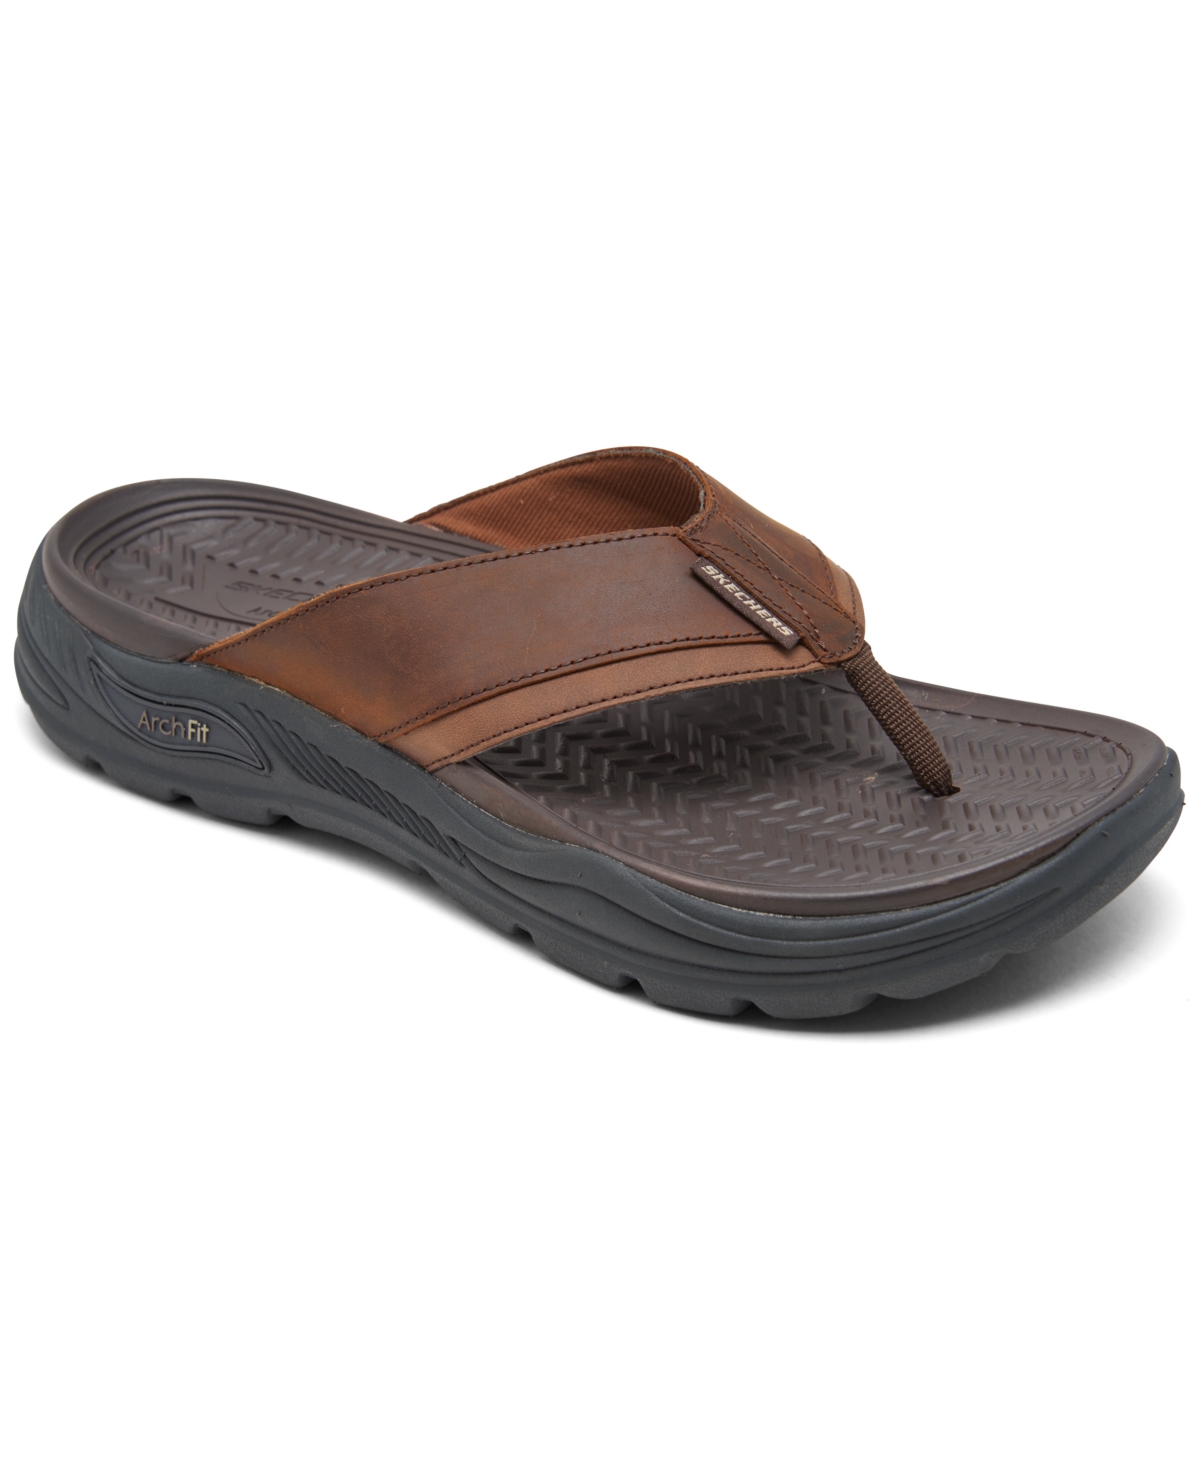 Pump langsom Megalopolis Skechers Men's Arch Fit Motley SD - Malico Thong Sandals from Finish Line -  Macy's